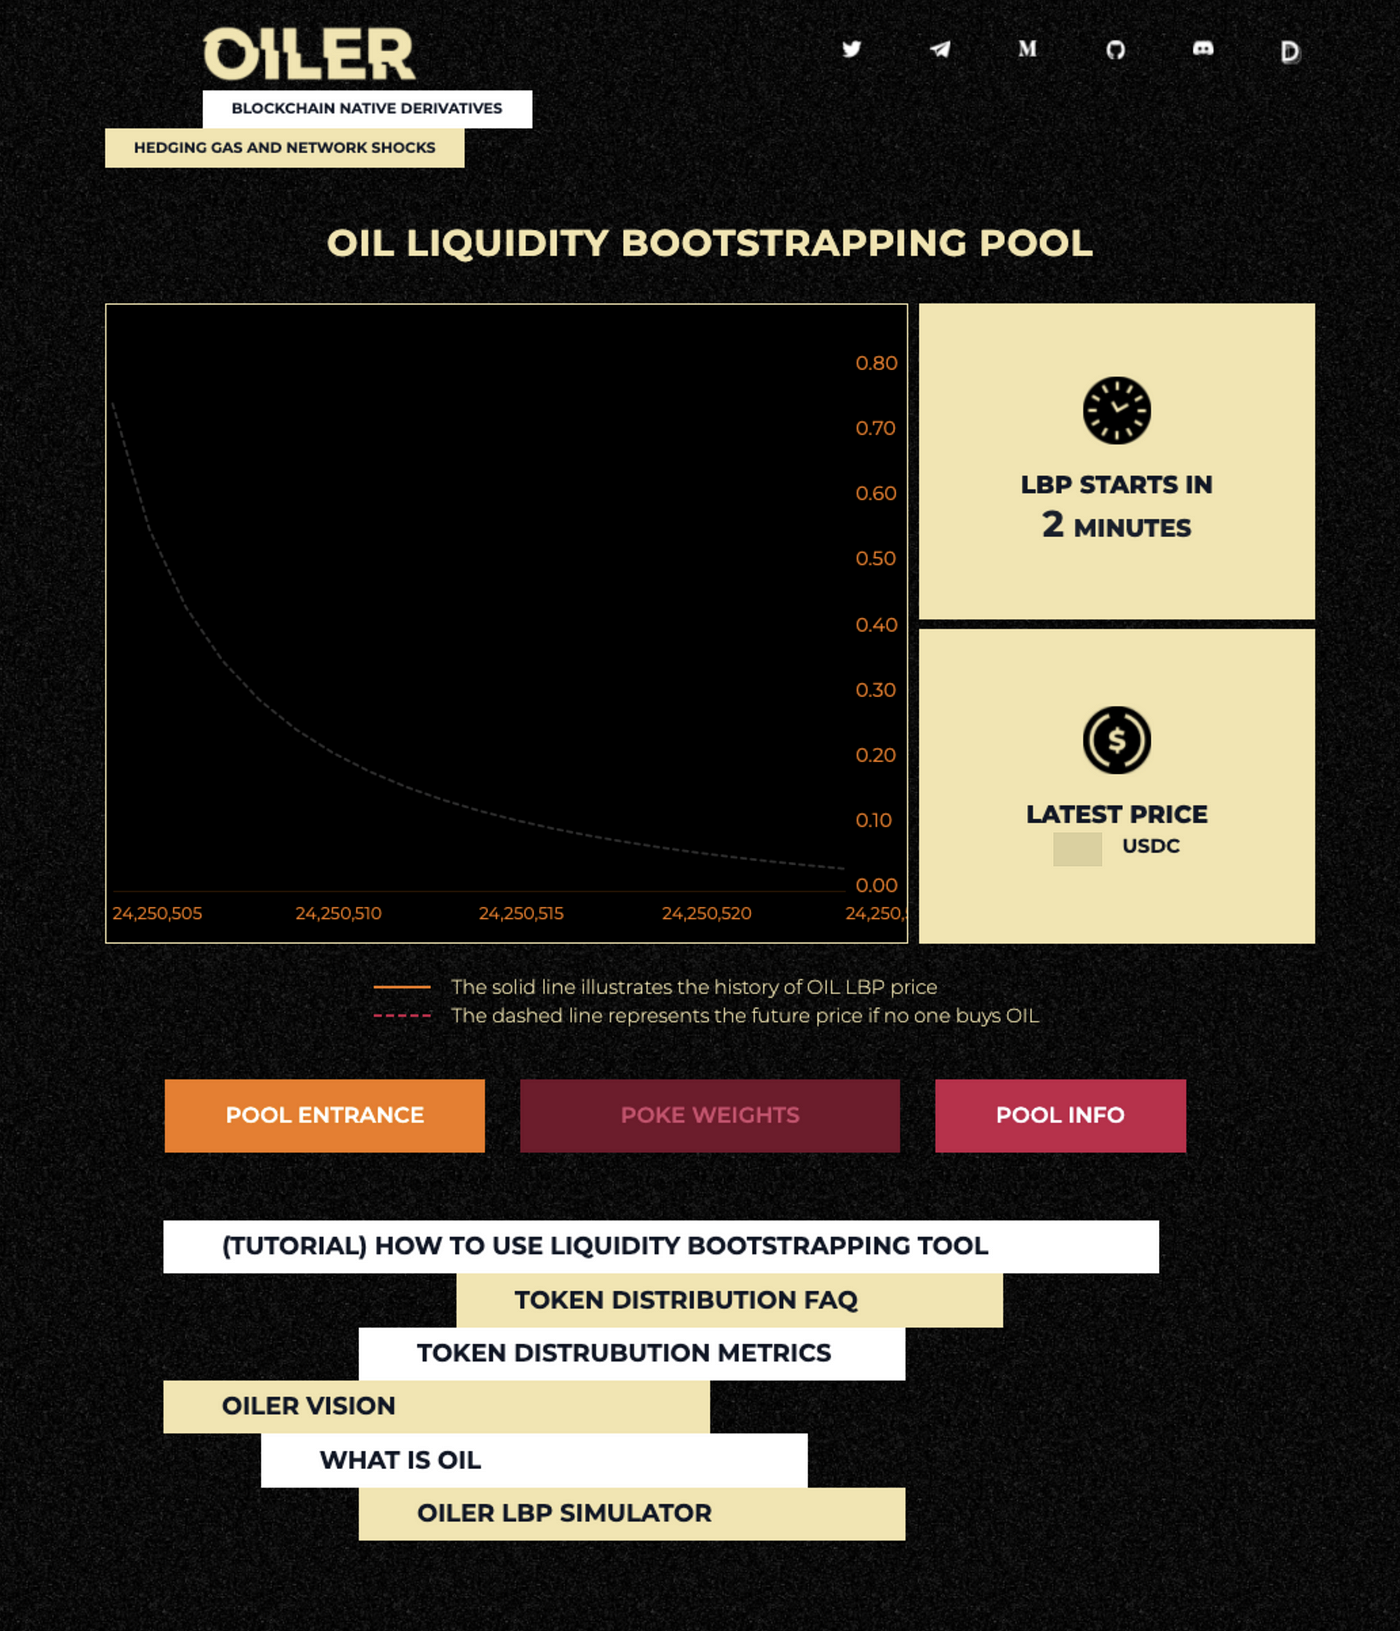 Step-by-Step Guide to Oiler's Liquidity Bootstrapping Pool on